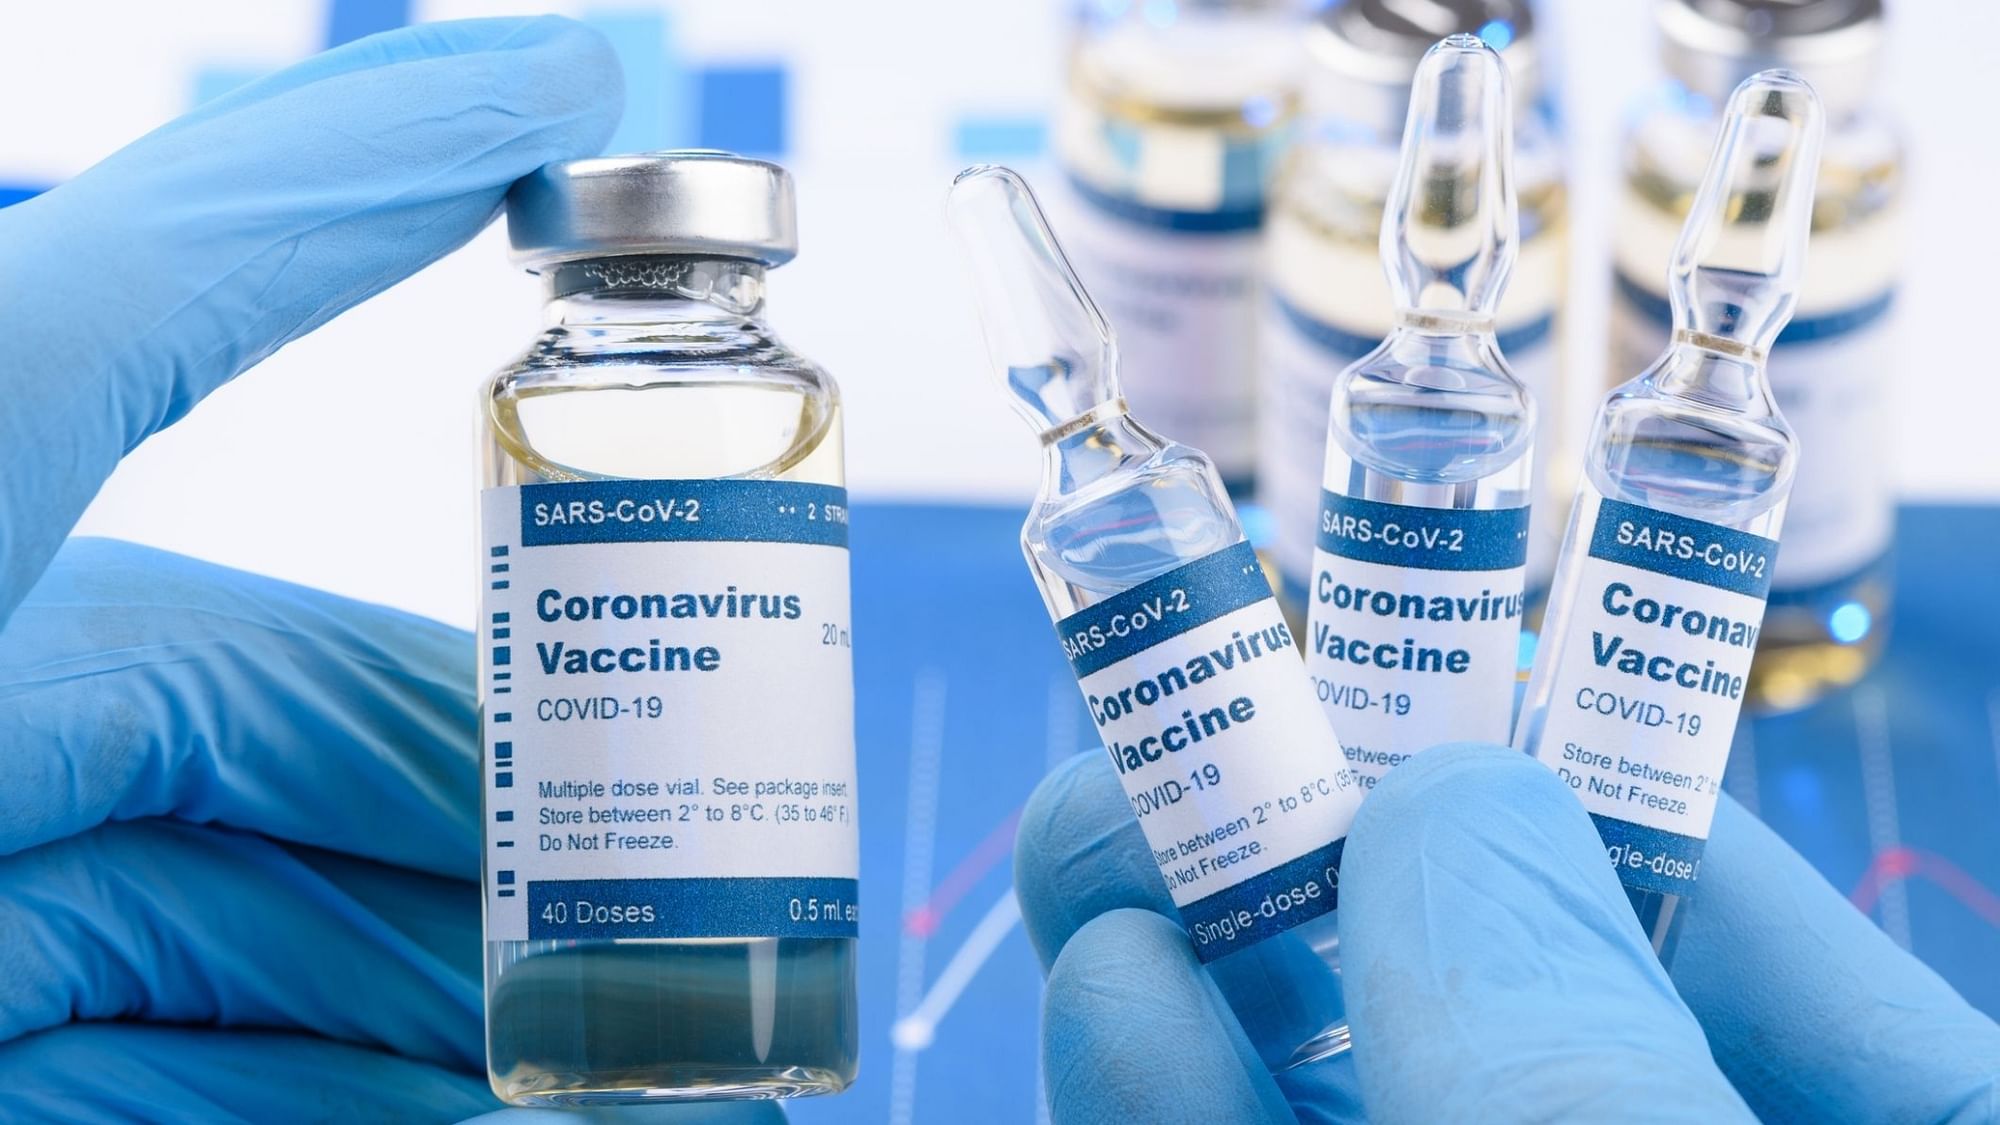 <div class="paragraphs"><p>Citing data from a study carried out by Oxford University, AstraZeneca on Thursday, 23 December, said that a three dose course of its COVID-19 vaccine is effective against the new coronavirus variant Omicron.</p></div>